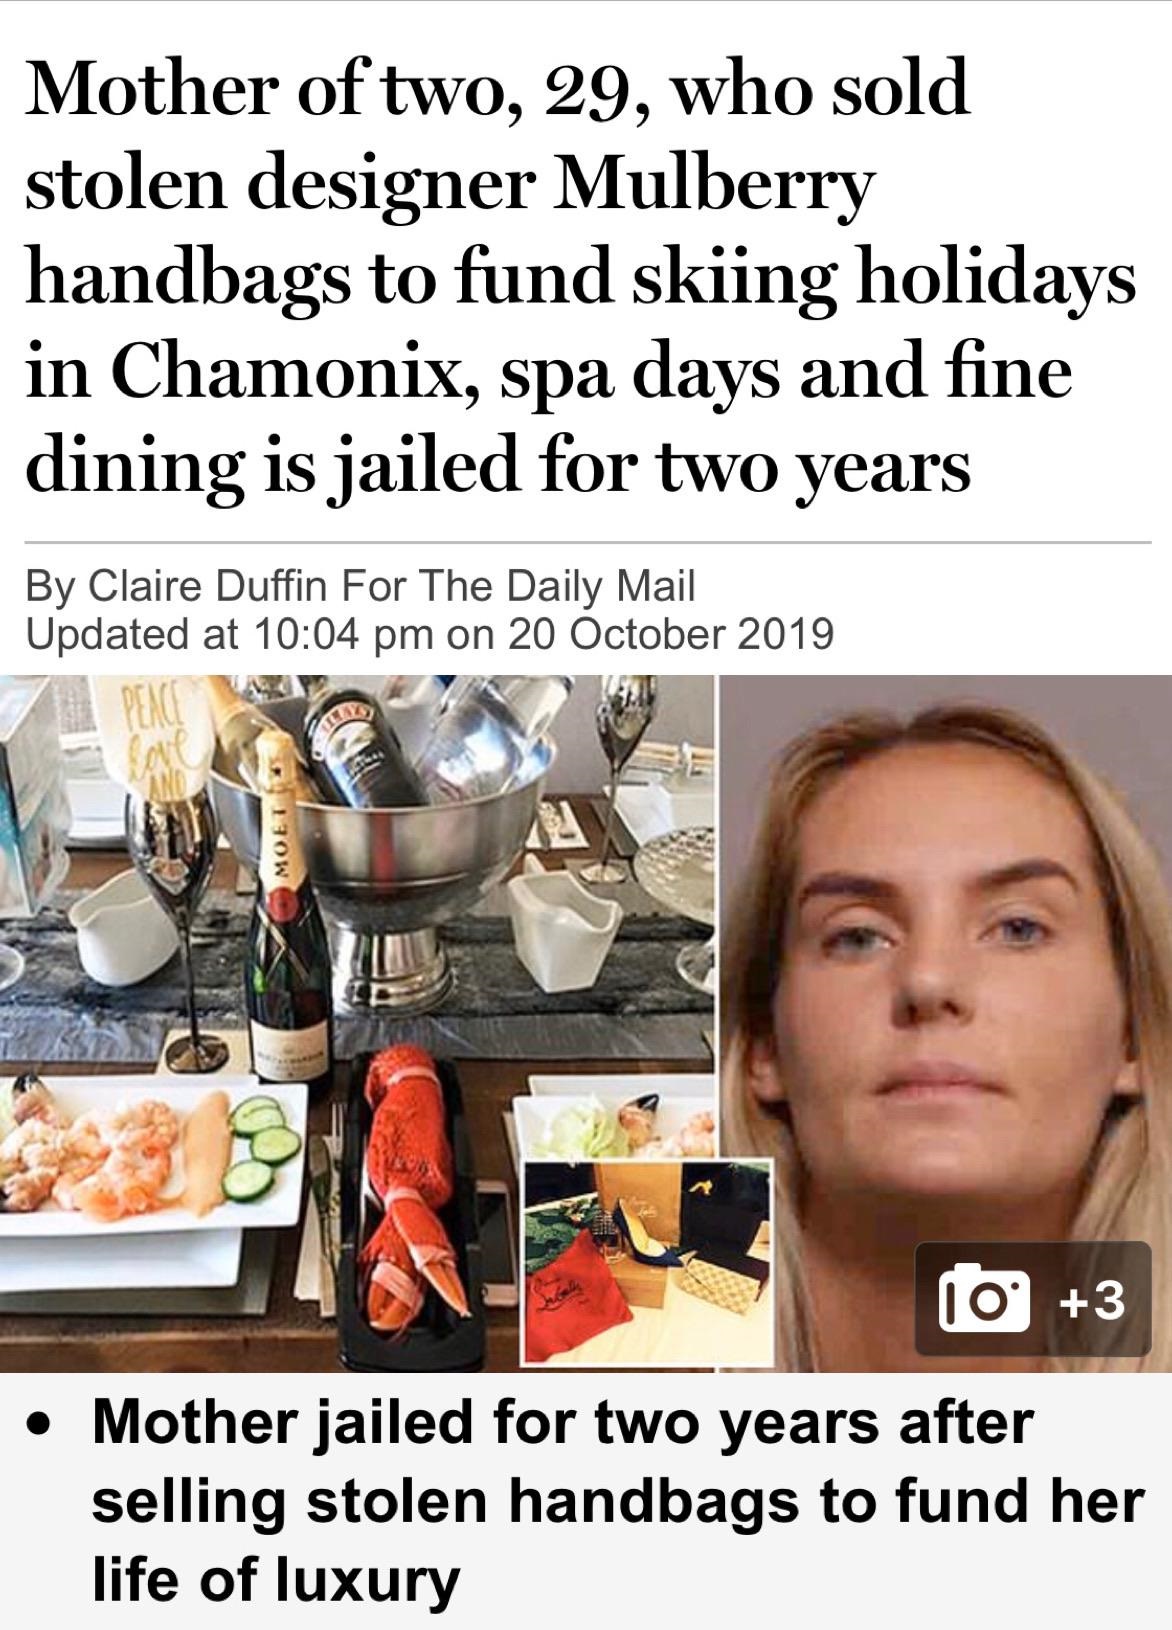 four diamonds fund - Mother of two, 29, who sold stolen designer Mulberry handbags to fund skiing holidays in Chamonix, spa days and fine dining is jailed for two years By Claire Duffin For The Daily Mail Updated at on 10 3 Mother jailed for two years aft